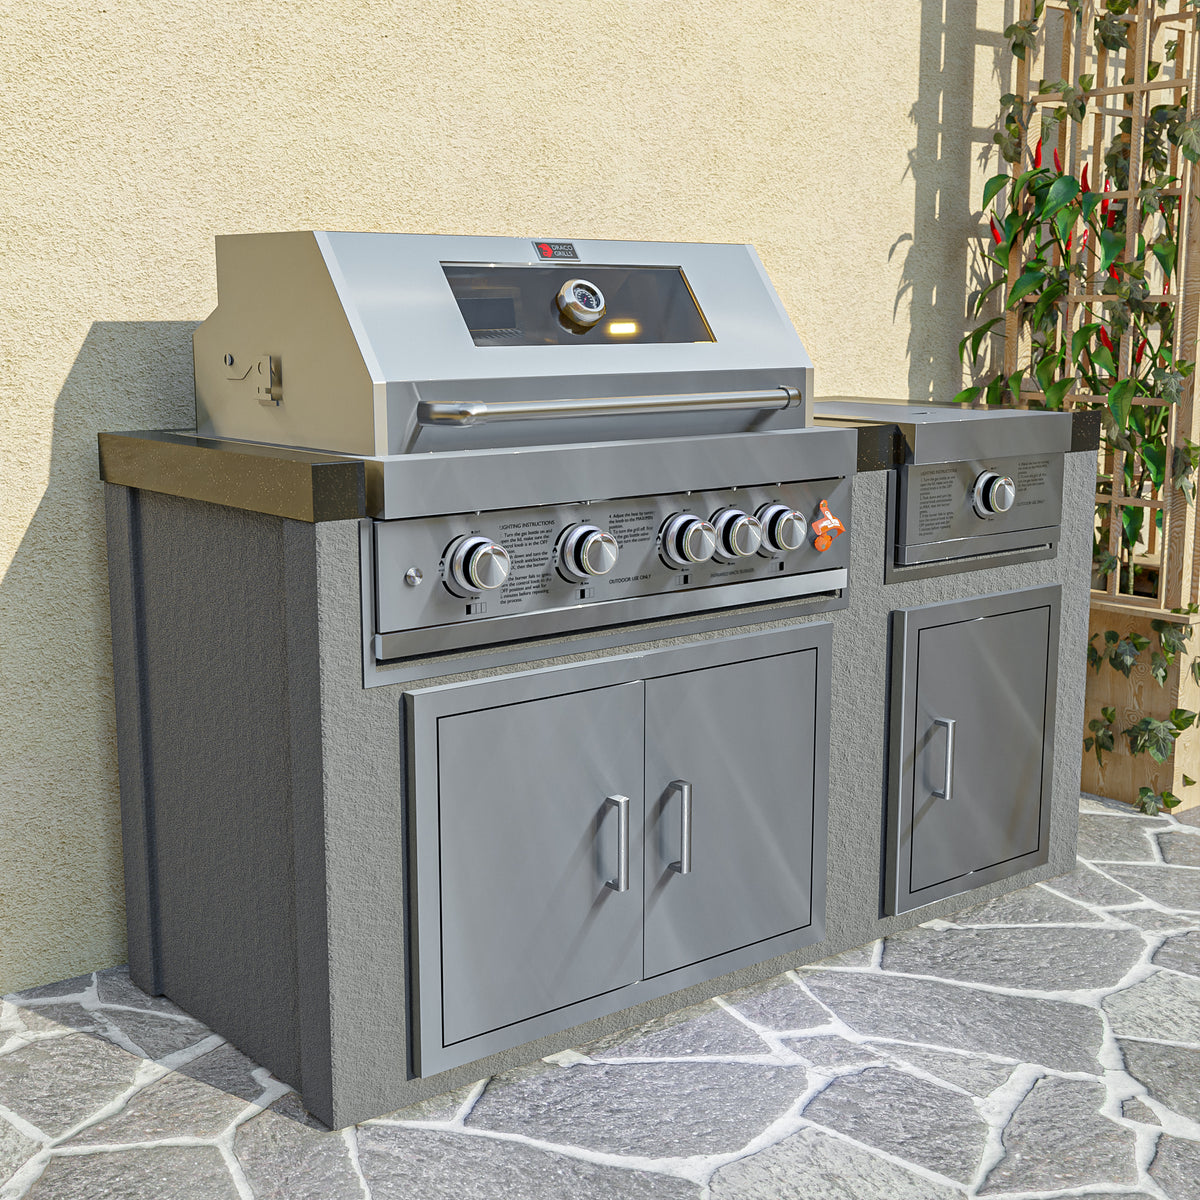 Draco Grills Avalon Stainless Steel Straight Outdoor Kitchen with 4 Burner BBQ and Fridge